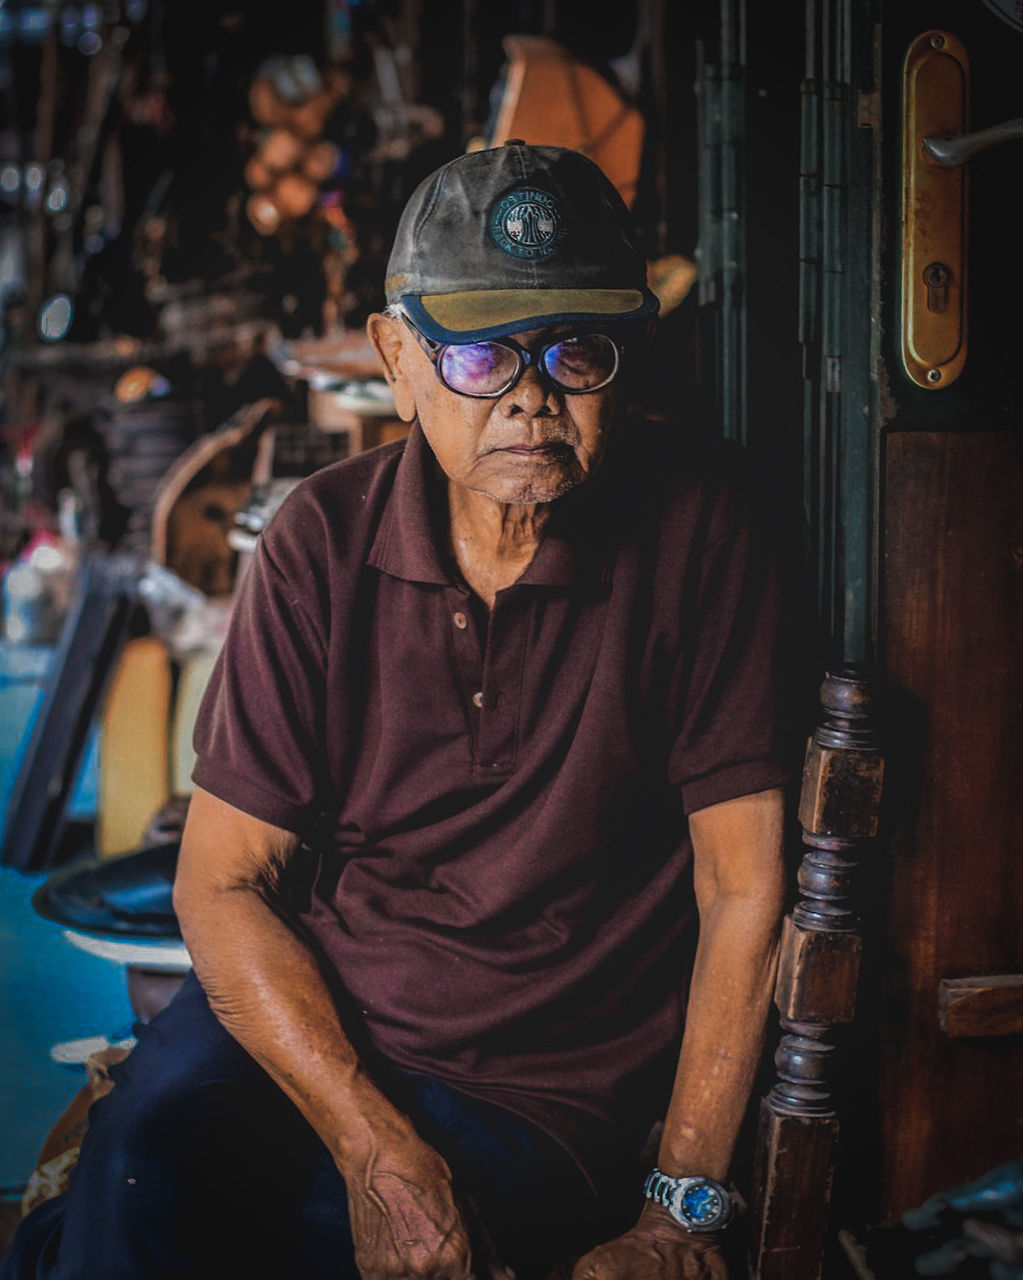 adult, one person, men, occupation, glasses, person, business finance and industry, working, portrait, front view, waist up, looking at camera, eyeglasses, workshop, indoors, manual worker, human face, mature adult, sitting, business, clothing, three quarter length, senior adult